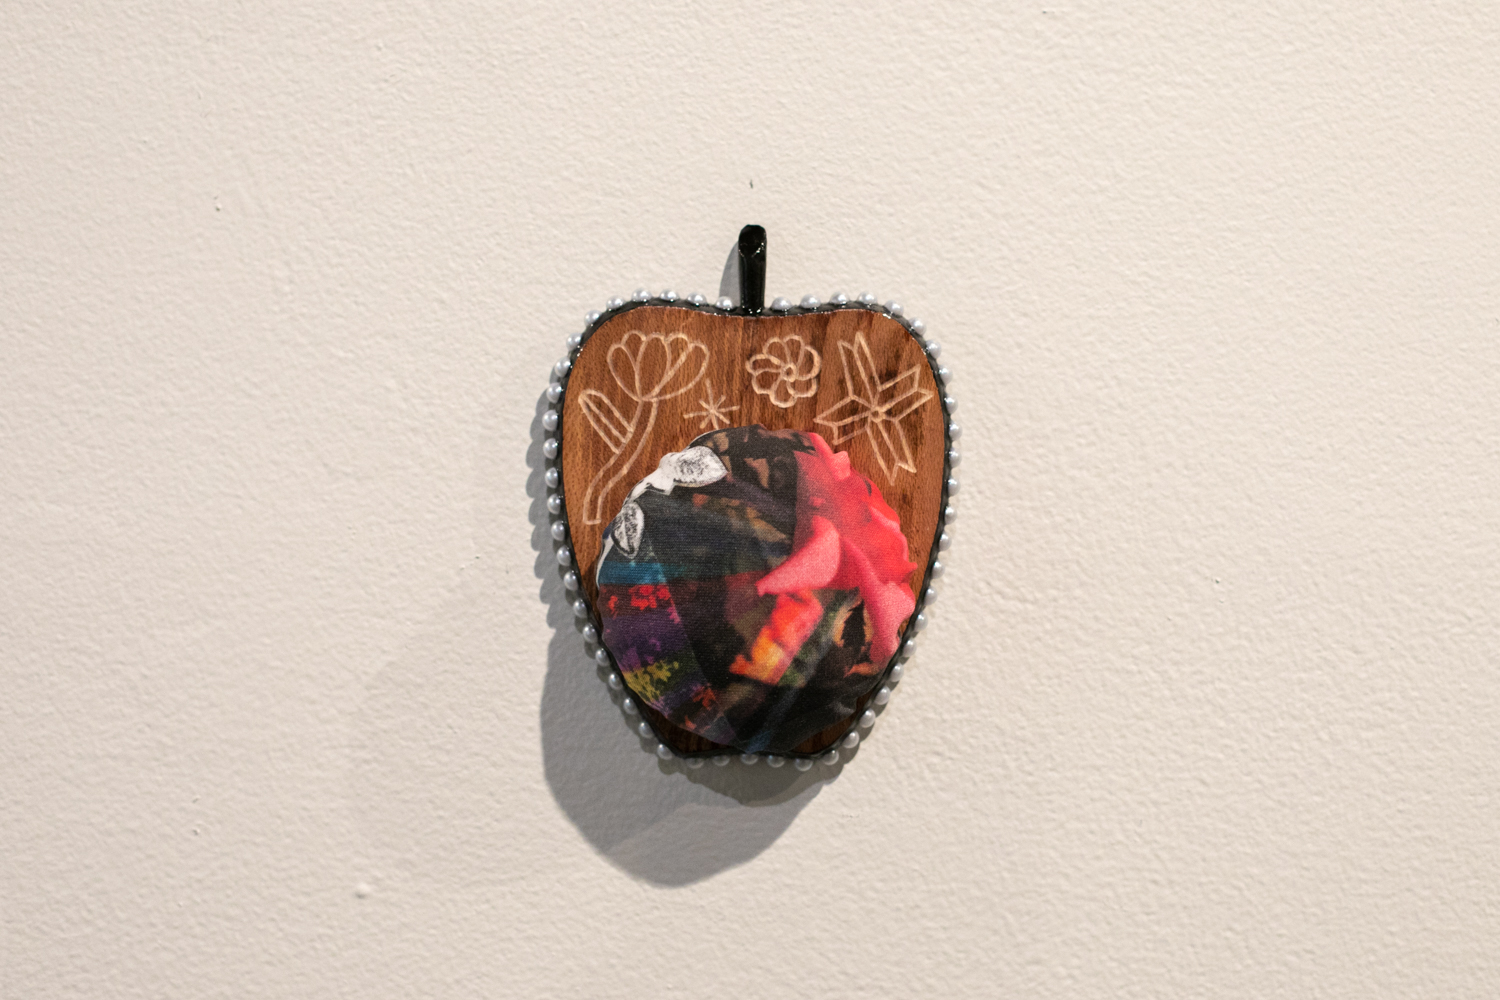  Apple Isle Pincushion, 2019, found wood coaster (engraved), handmade paper collage digitally printed on cotton sateen, plastic pearls, acrylic paint, resin.  Photography by Mel De Ruyter  